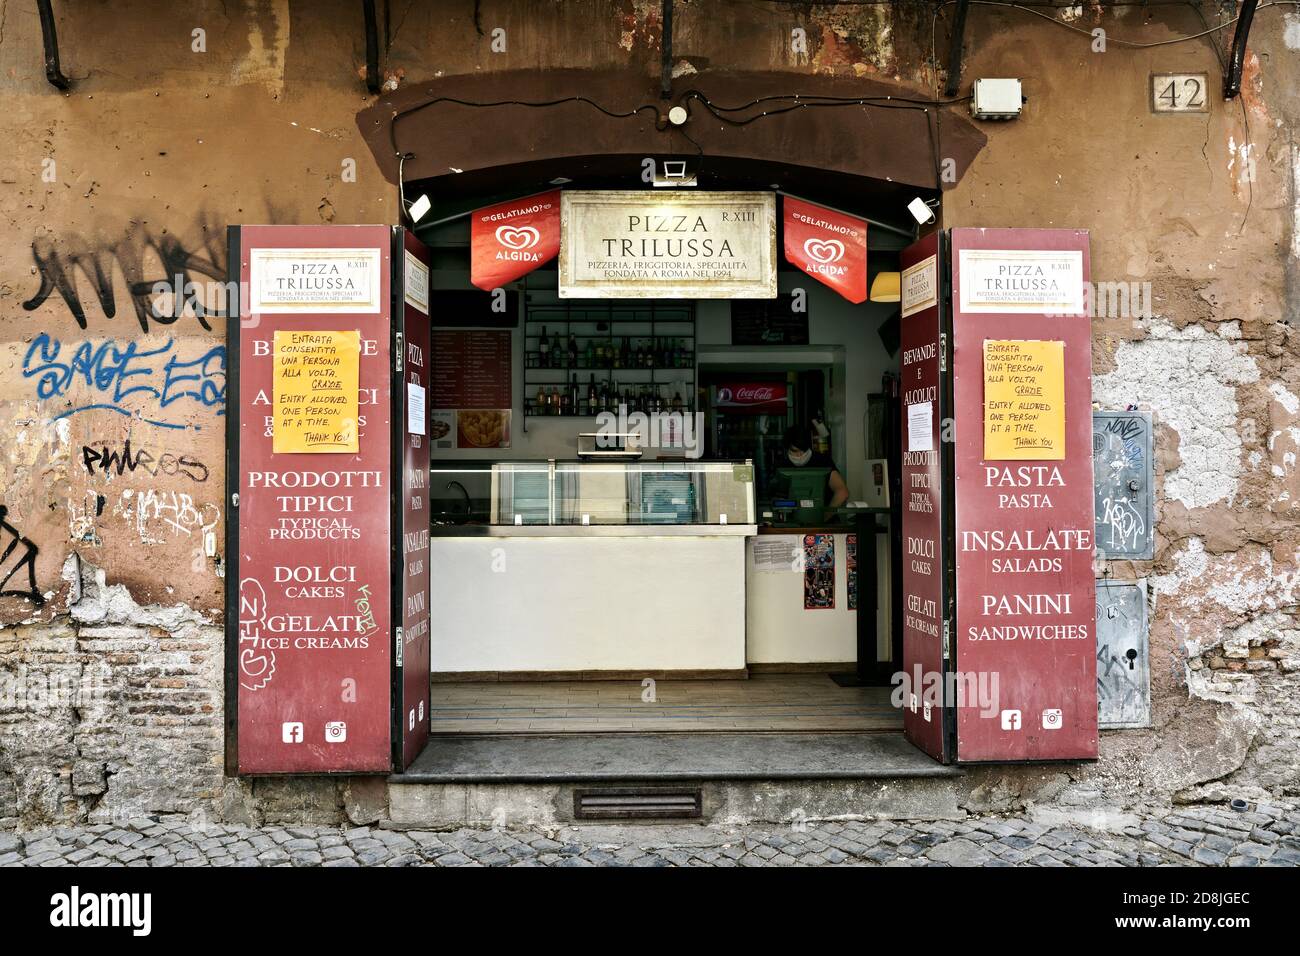 Typical pizzeria, banner signs indicating provisions for lockdown at the time of Covid 19, Corona Virus. Trastevere neighborhood. Rome, Italy, Europe. Stock Photo